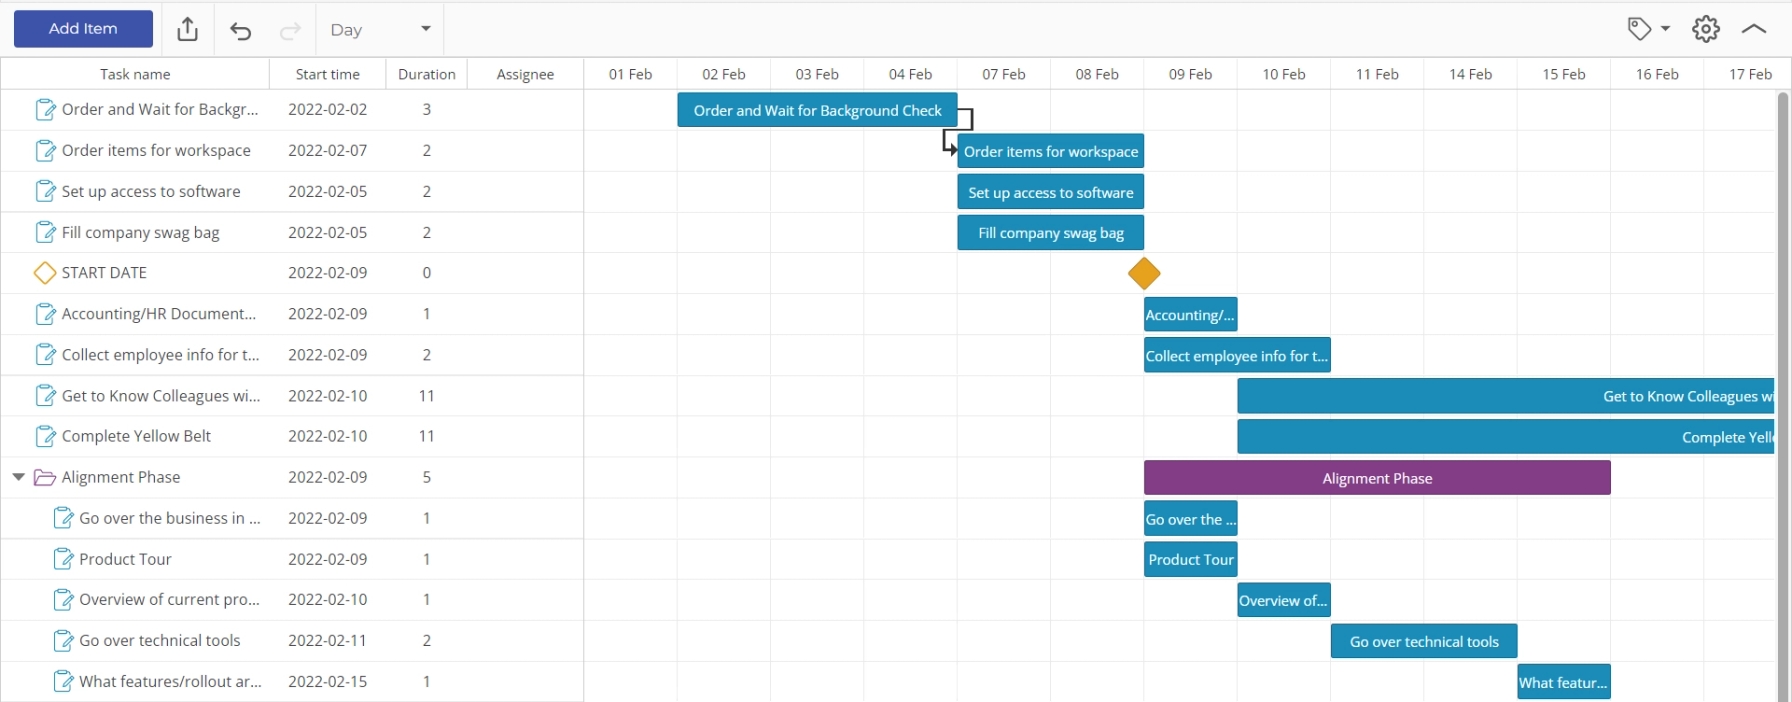 Example of a more complex Gantt chart.